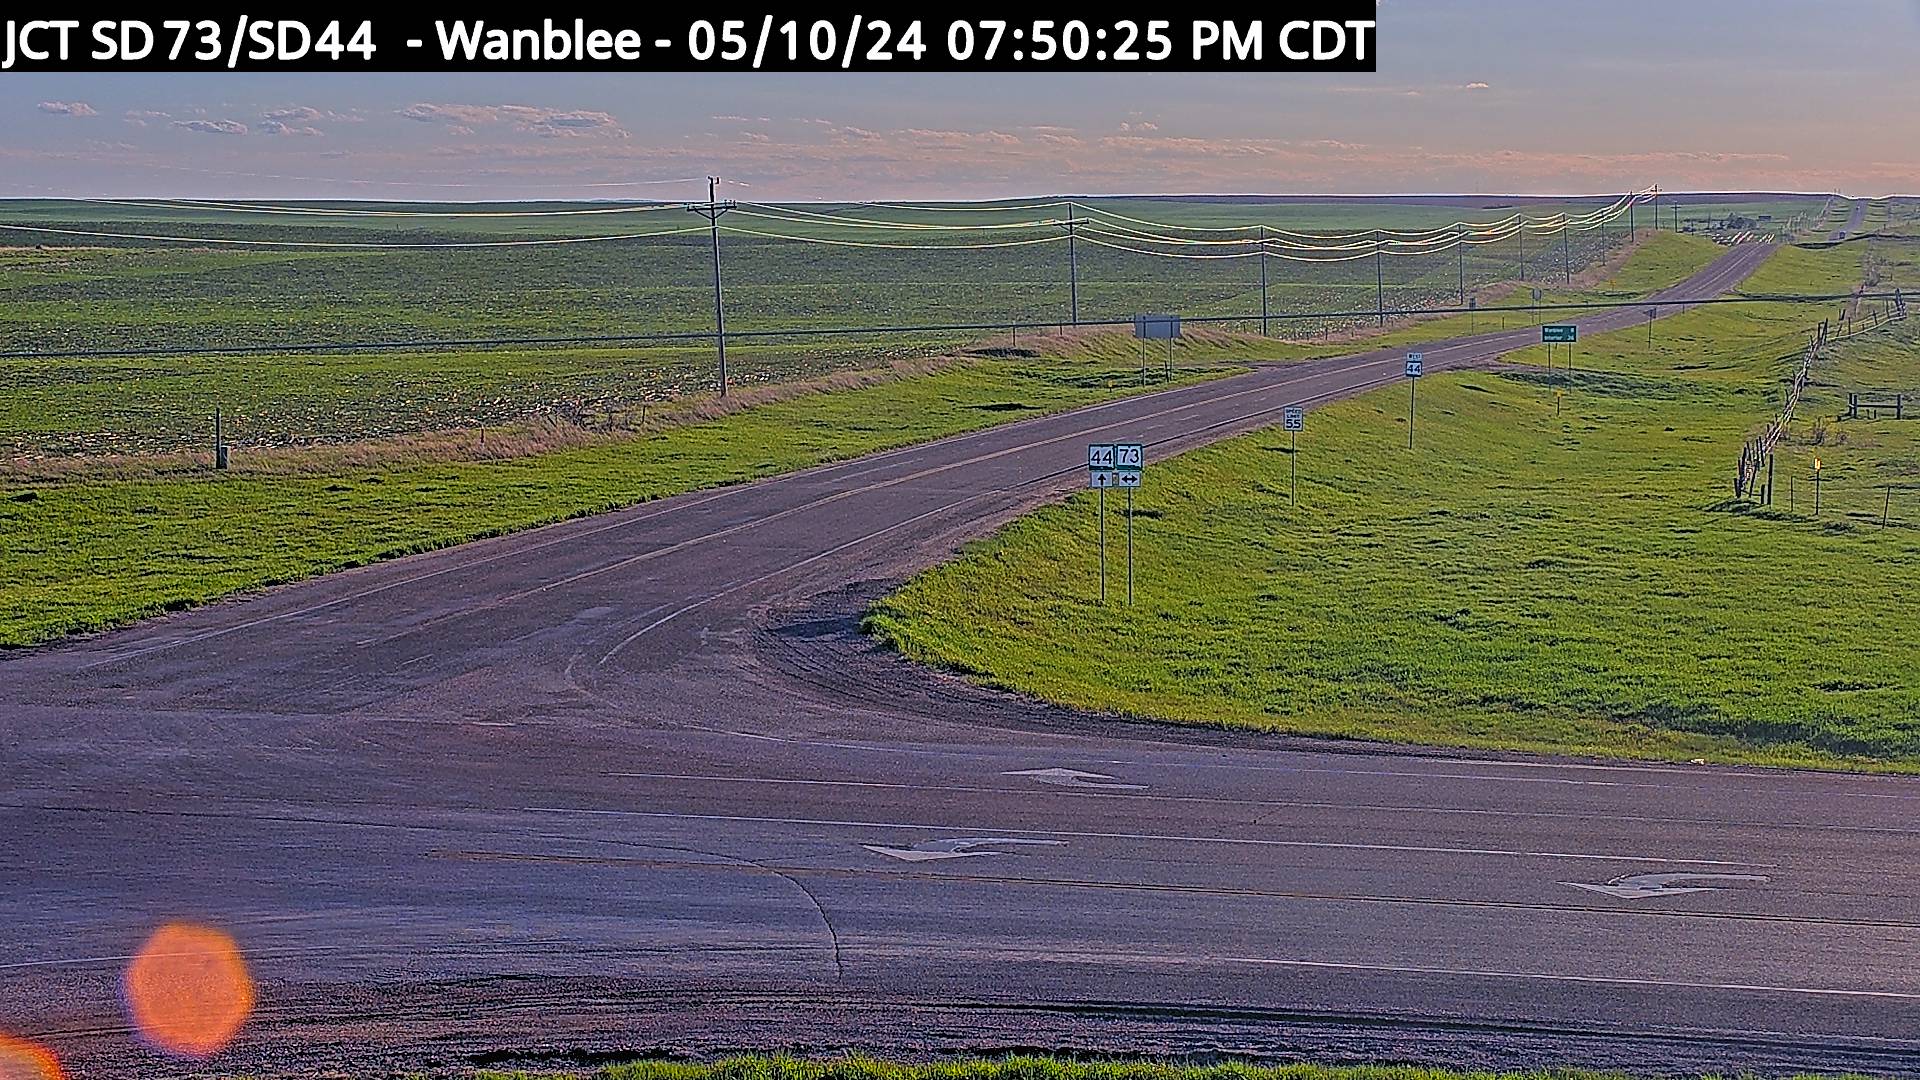 7 miles east of Wanblee at SD-44 & SD-73 - West Traffic Camera